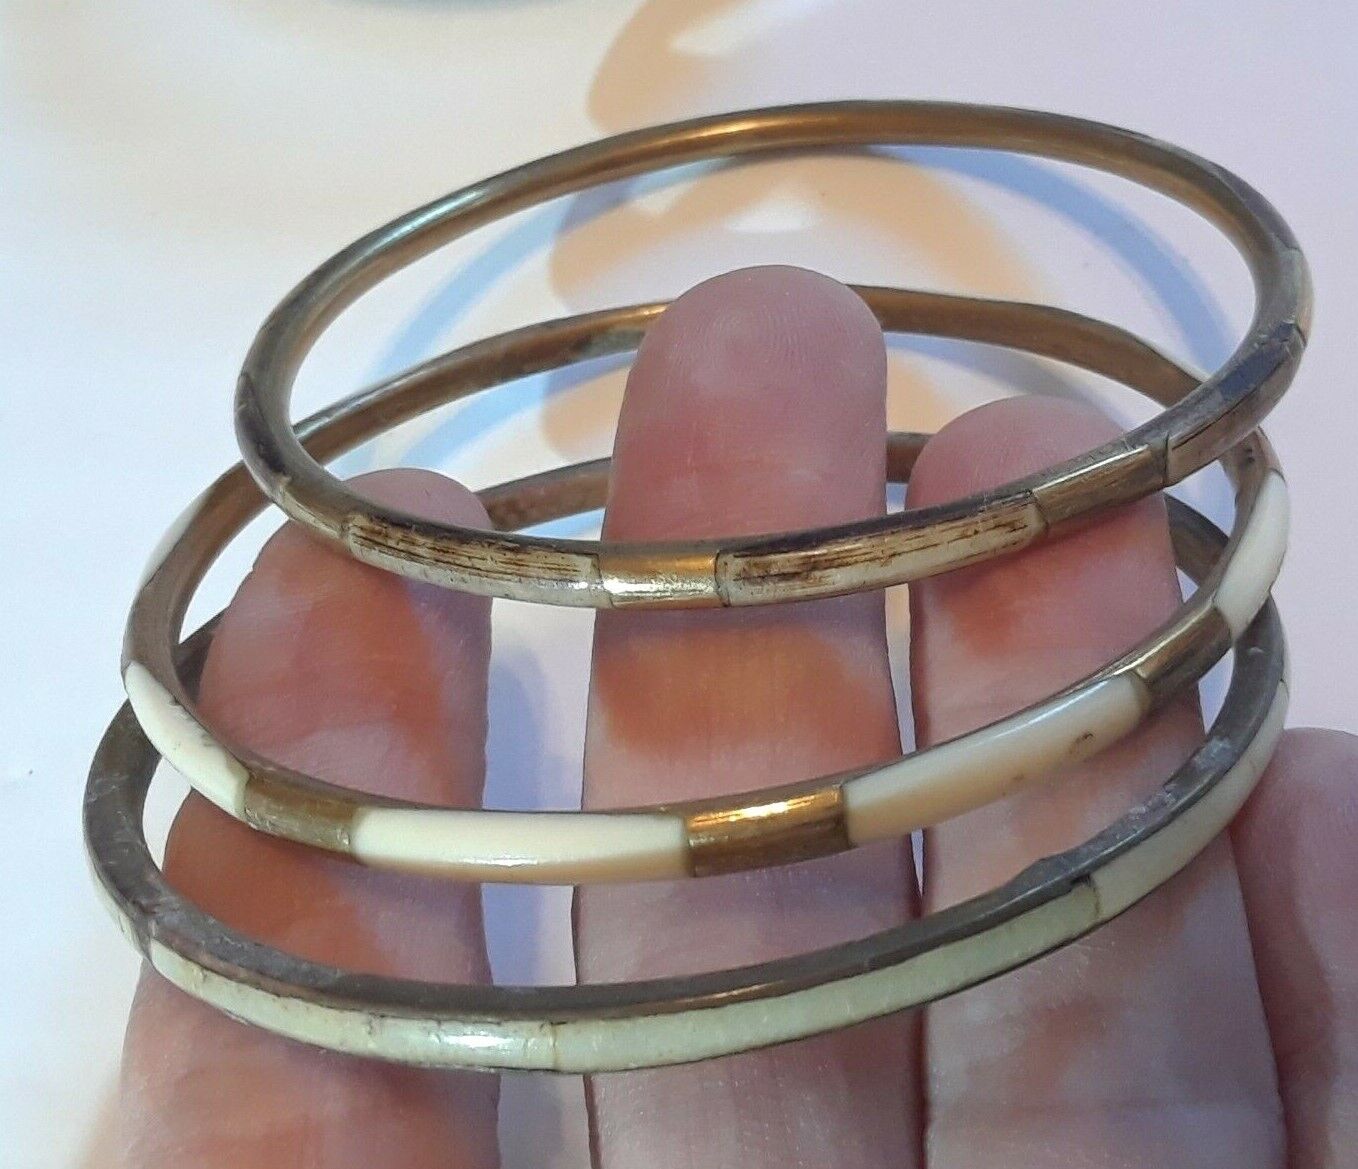 Lot of 5 gold tone bangle bracelets with inlay stone. Made in India. Beautiful! Unbranded - фотография #6